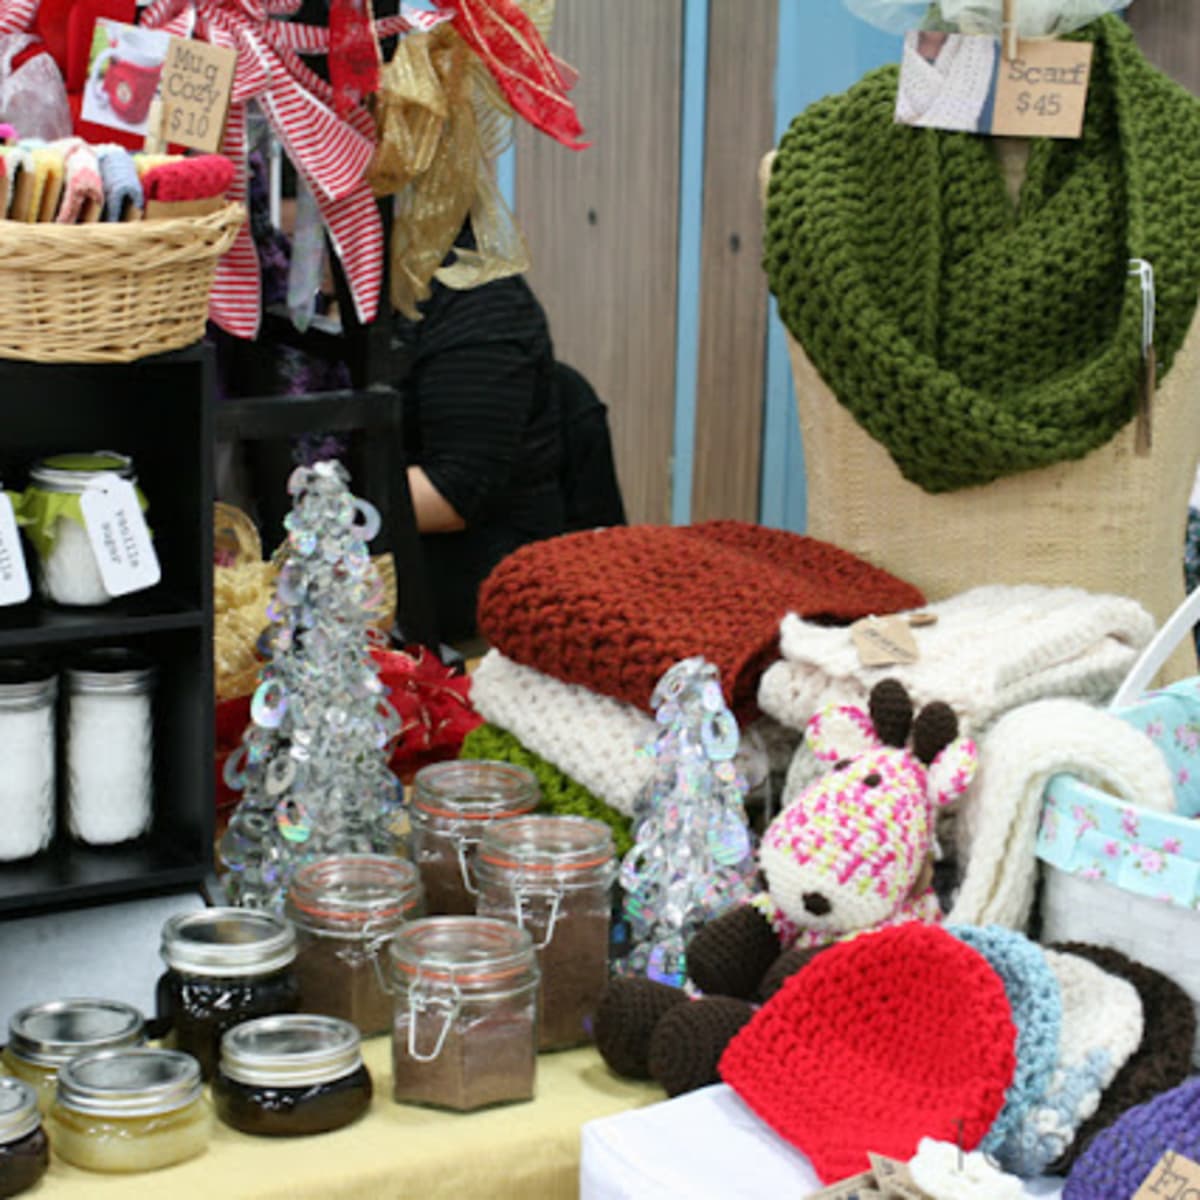 Gorgeous scarf display ideas for craft shows Make Money Selling Knit And Crochet Crafts At Craft Fairs Feltmagnet